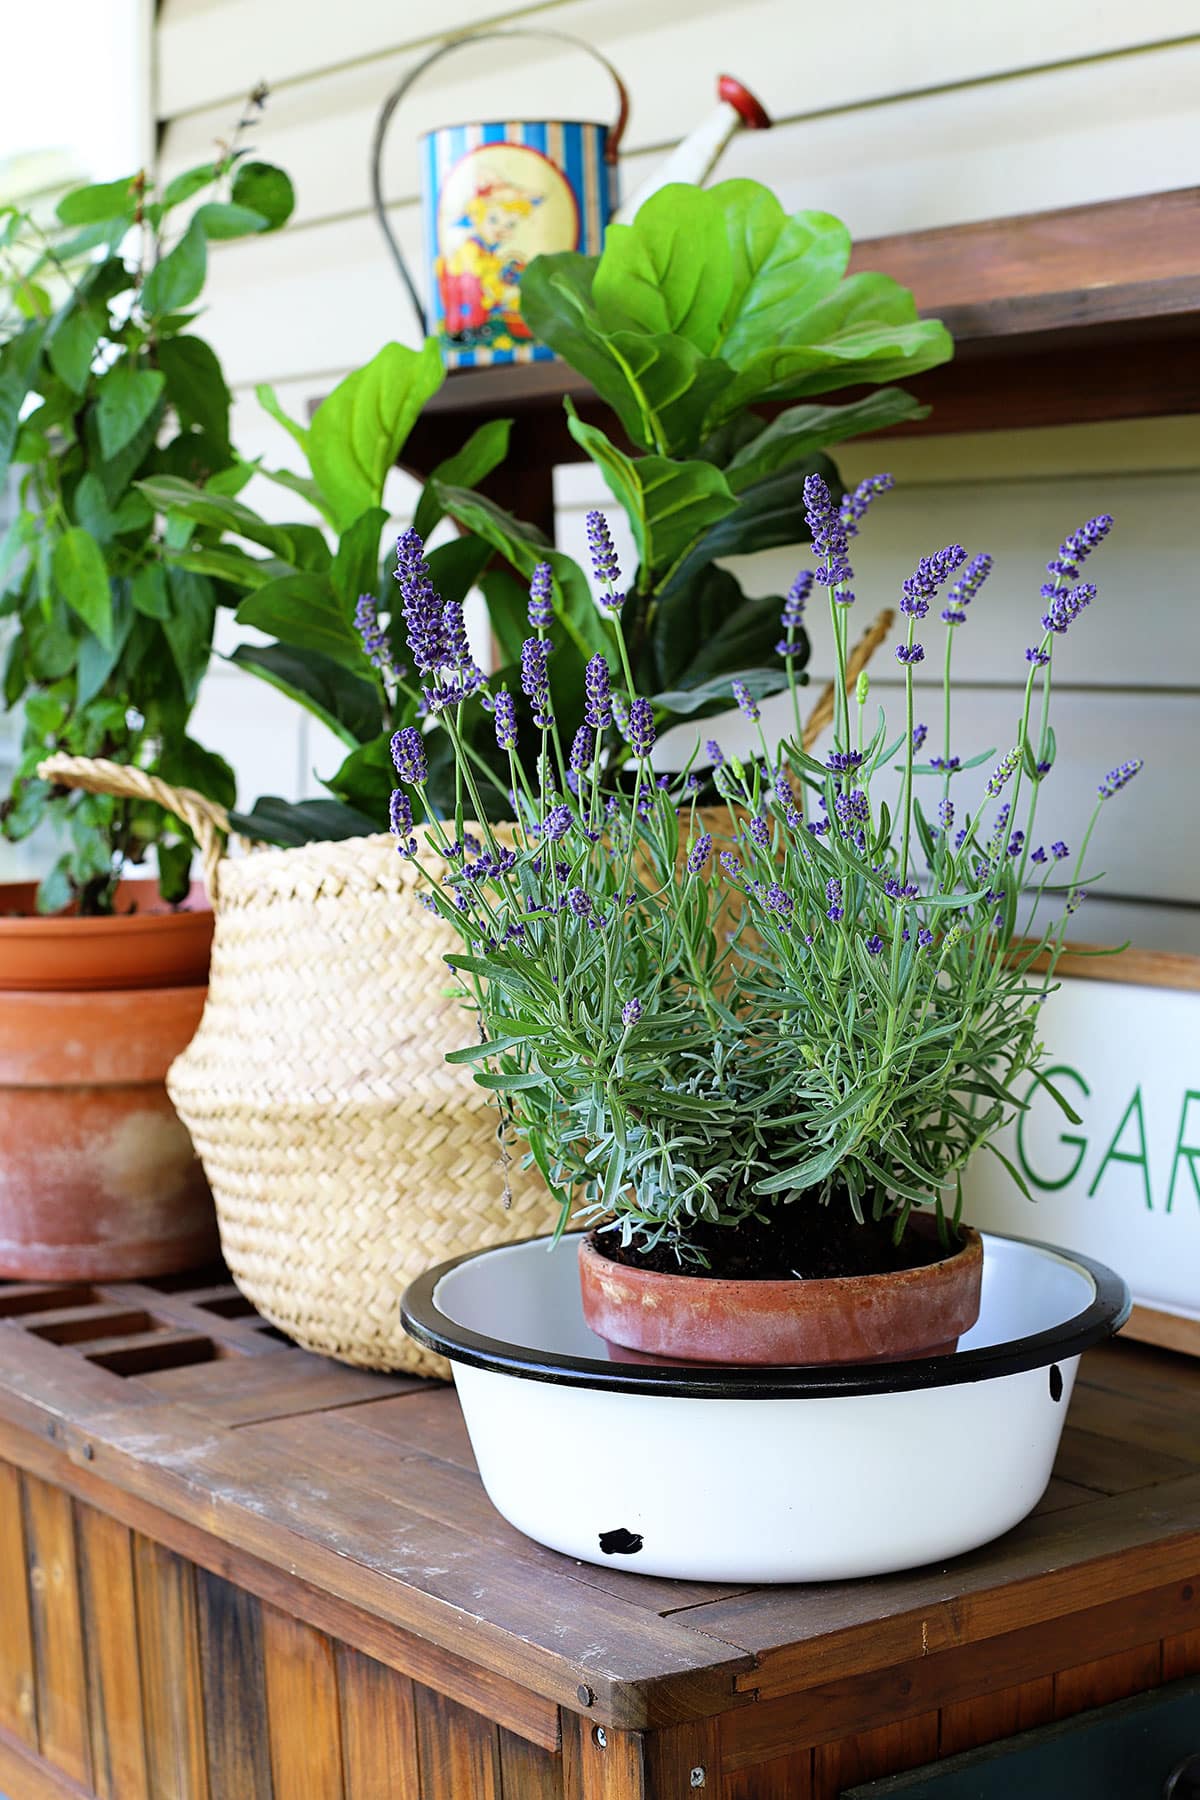 Learn how to repurpose inexpensive plastic bowls into vintage farmhouse-style enamelware basins. Great to use as outdoor planters or as farmhouse decor in your home.